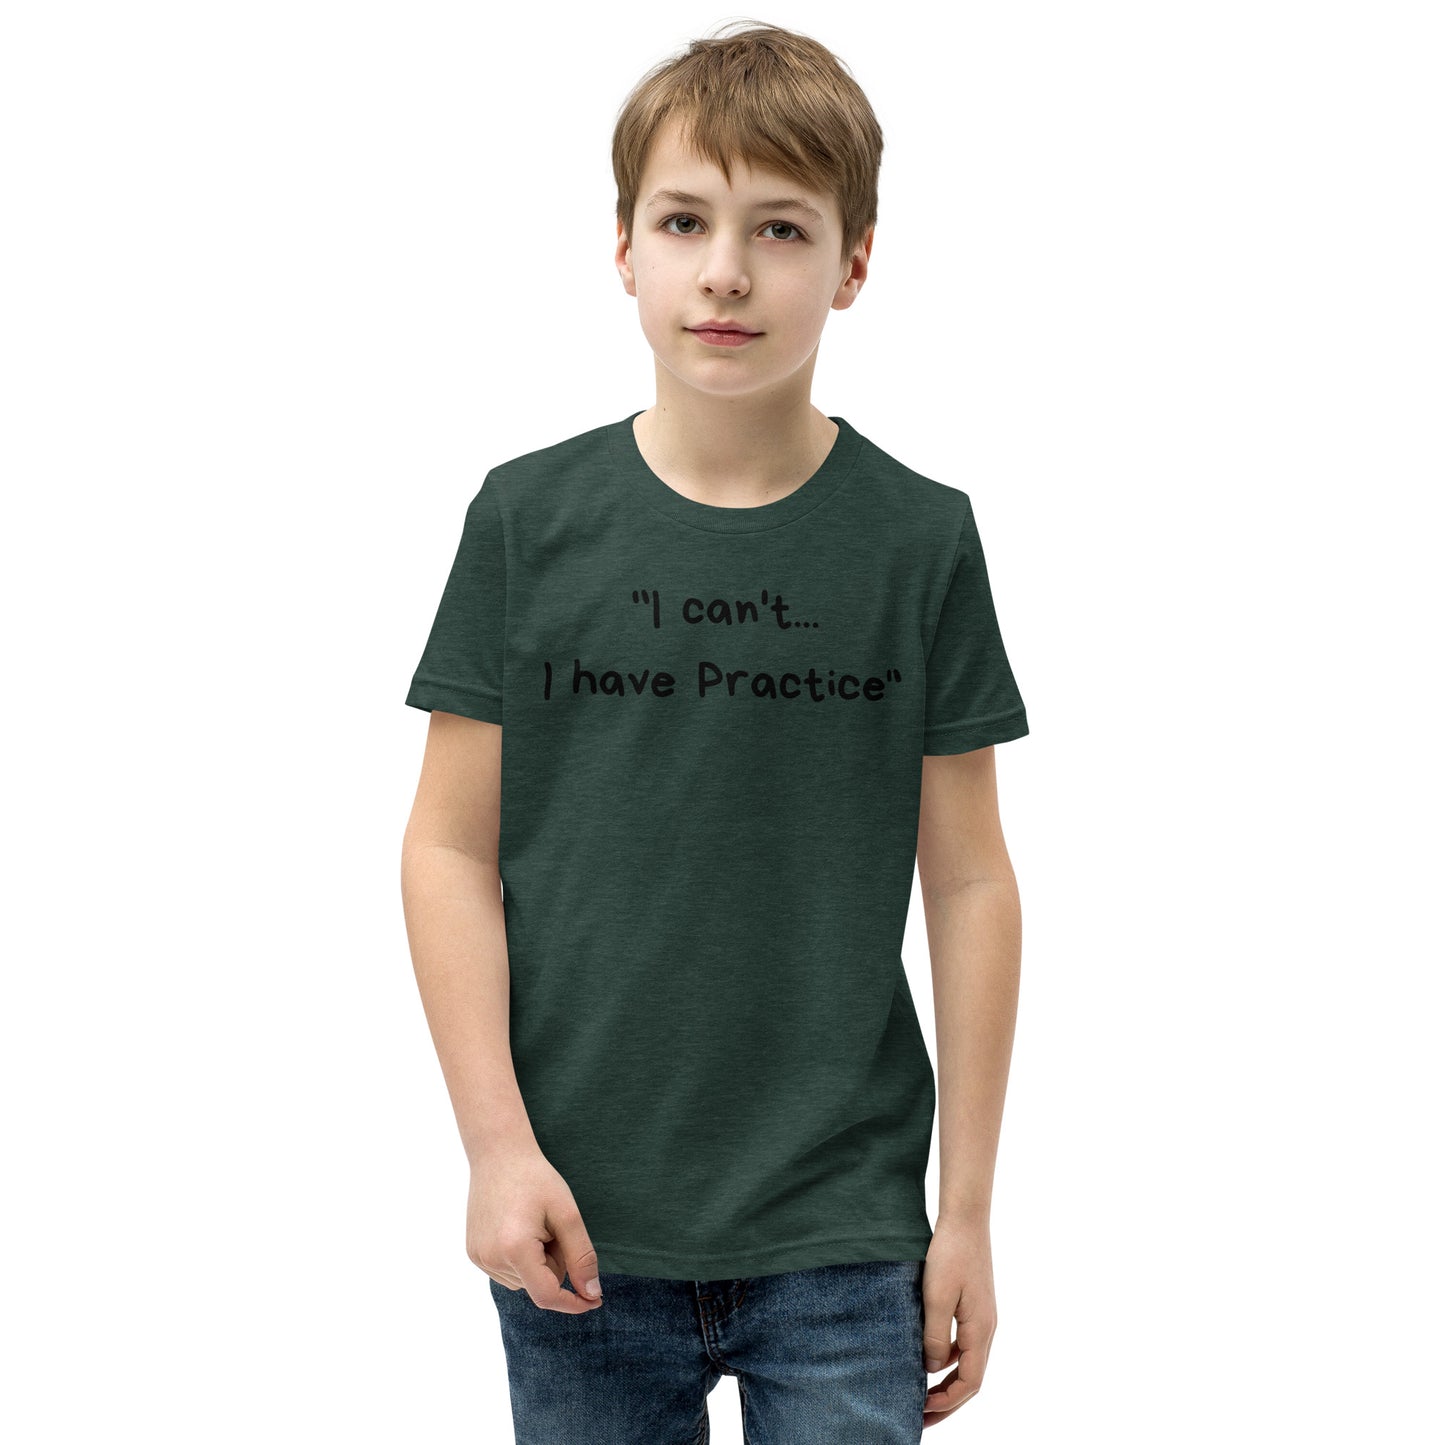 I Have Practice - Youth Short Sleeve T-Shirt